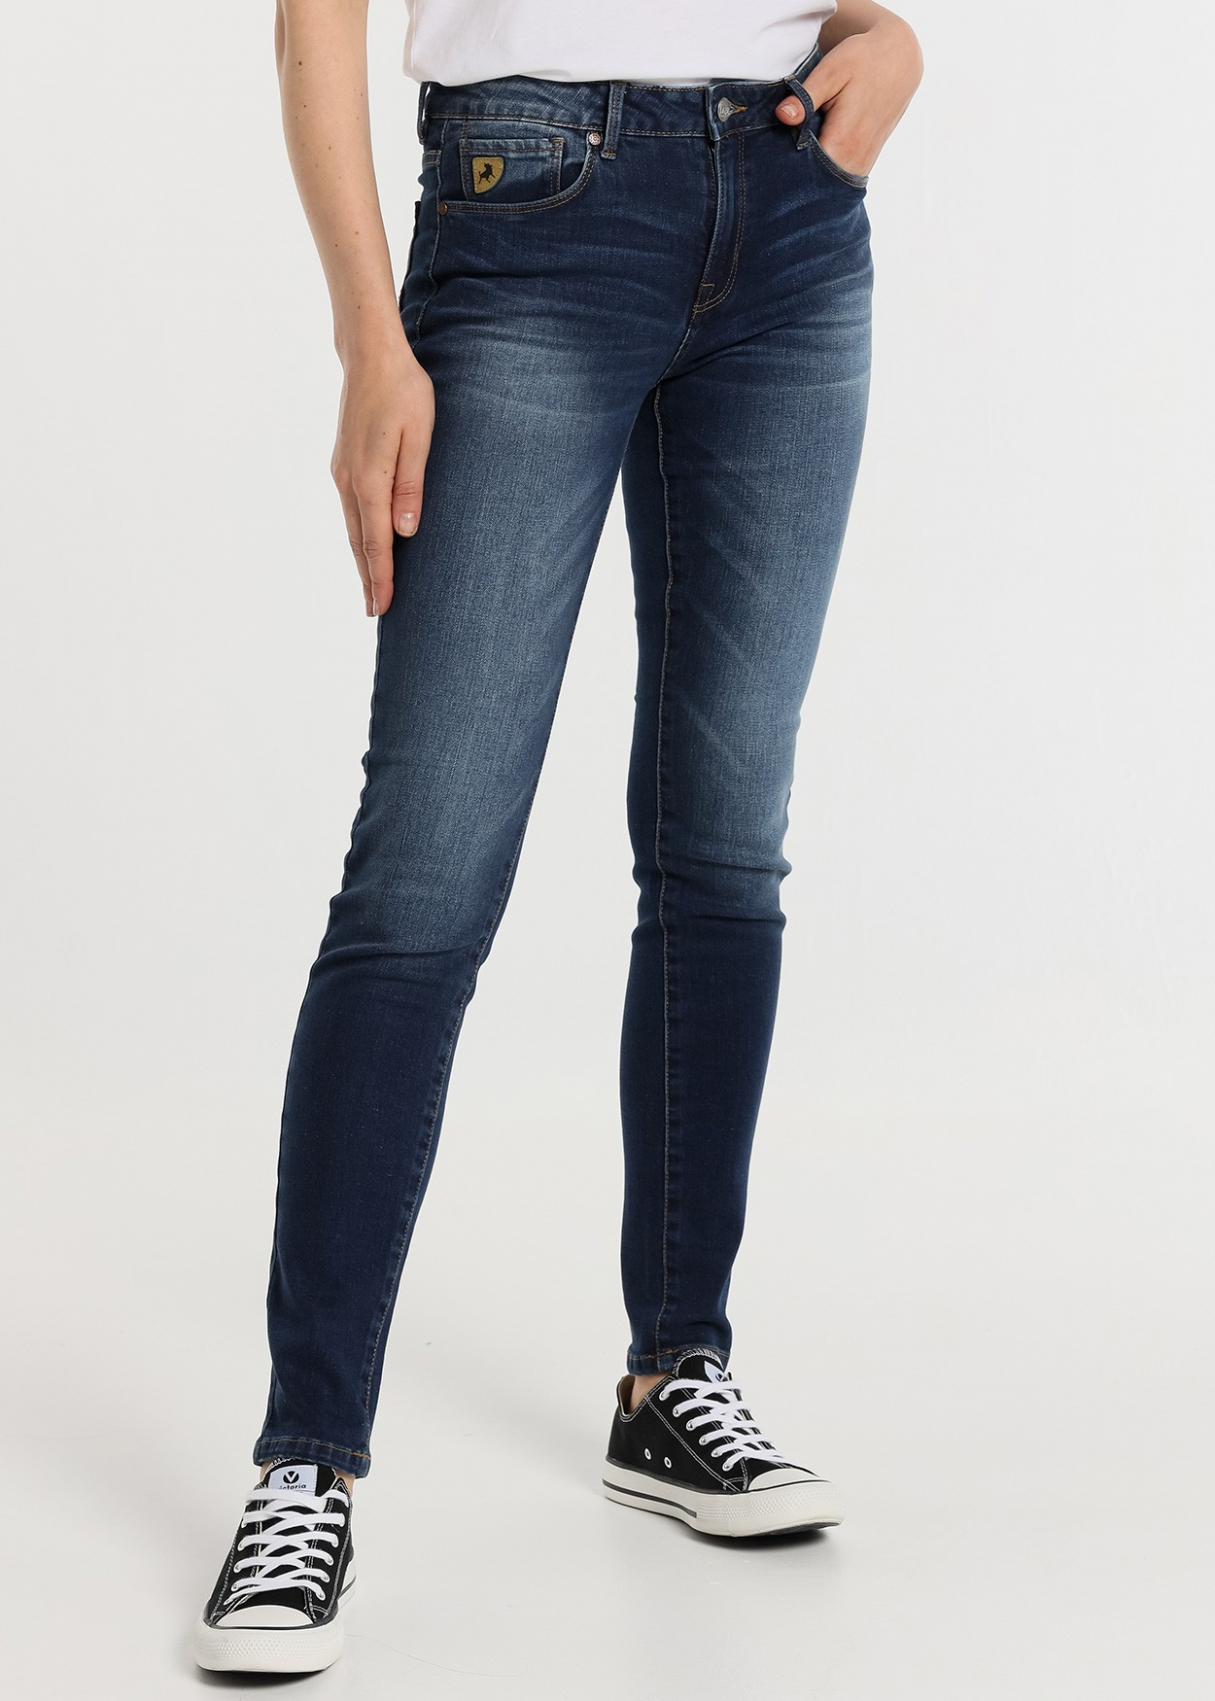 Jeans Coupe Skinny- Taille basse  |Tailles en pouces